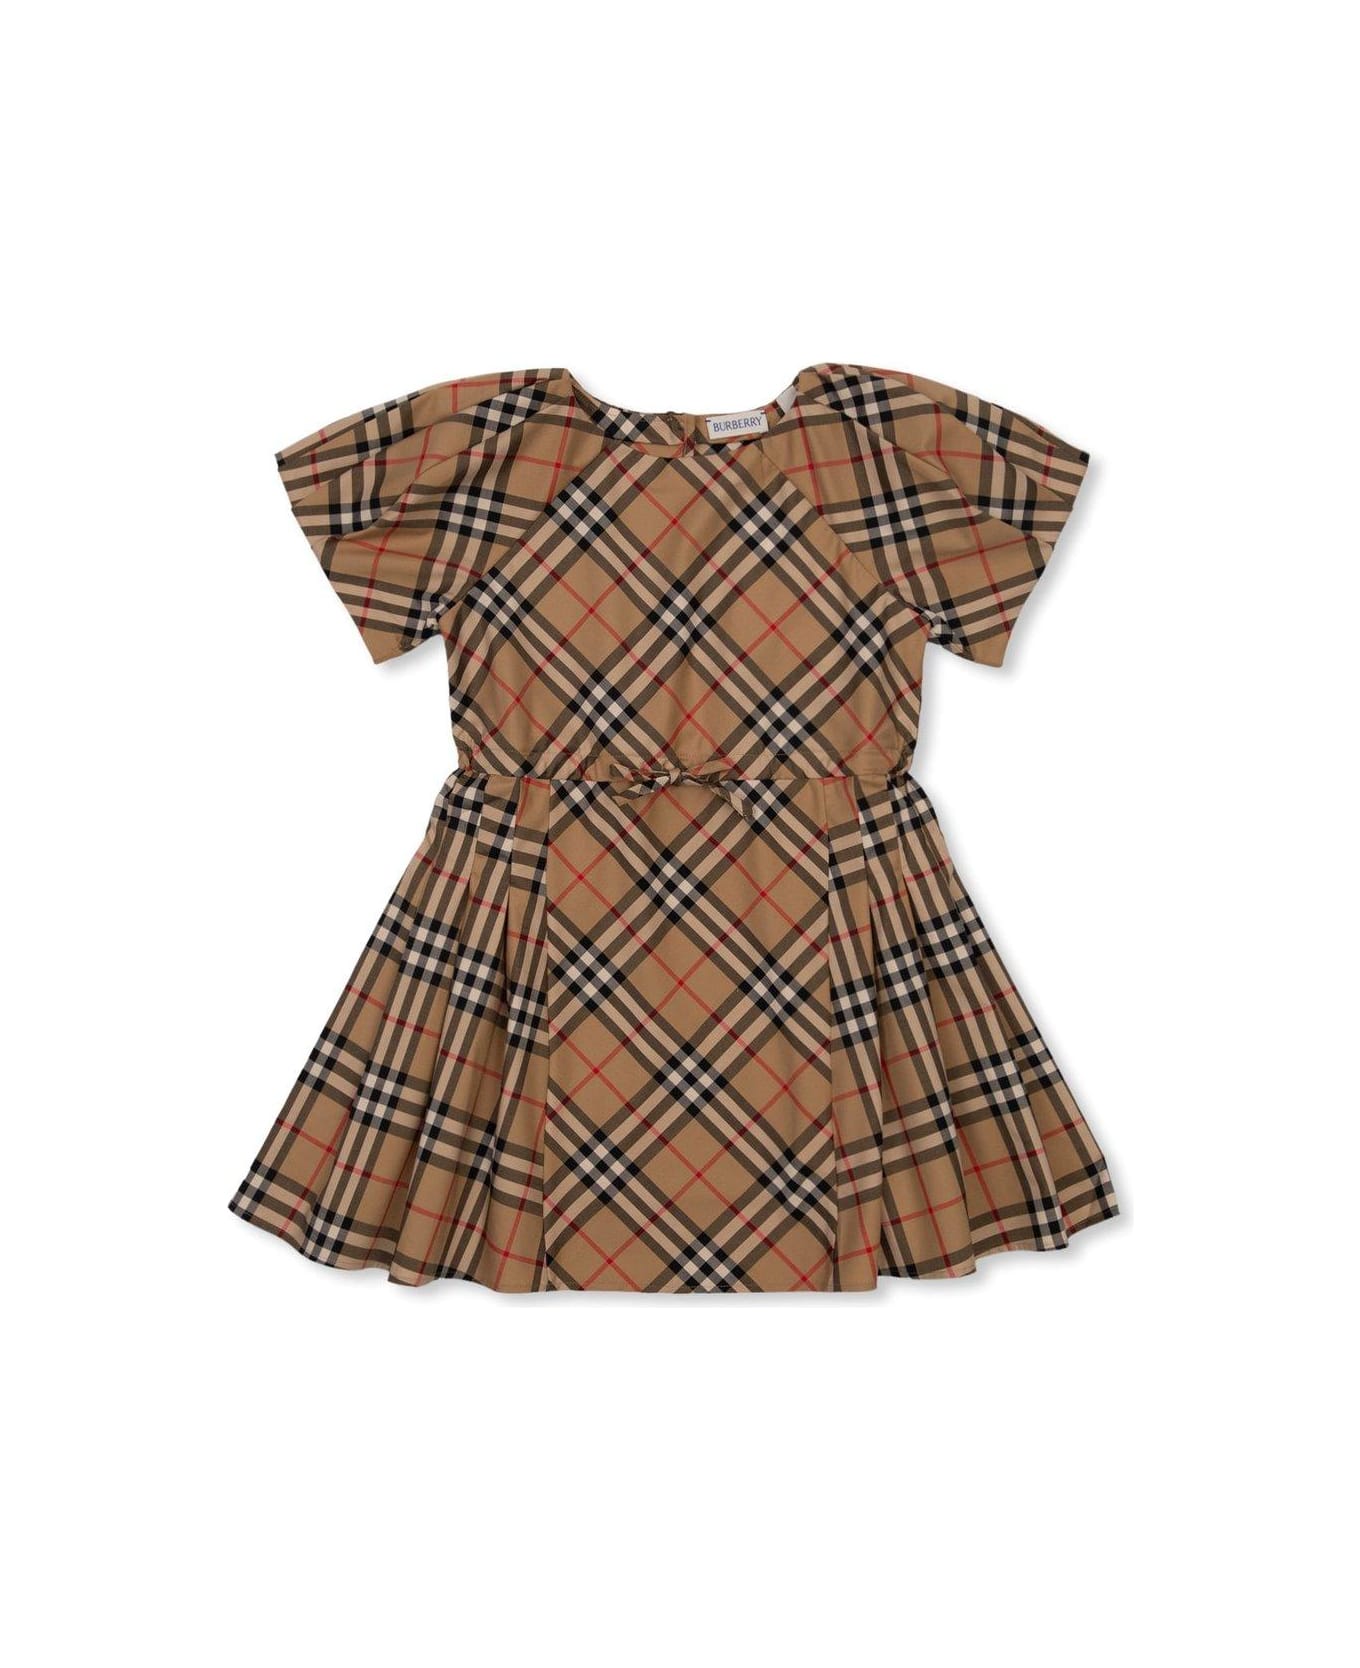 Burberry Checked Short-sleeved Dress - Archive beige ip chk ジャンプスーツ